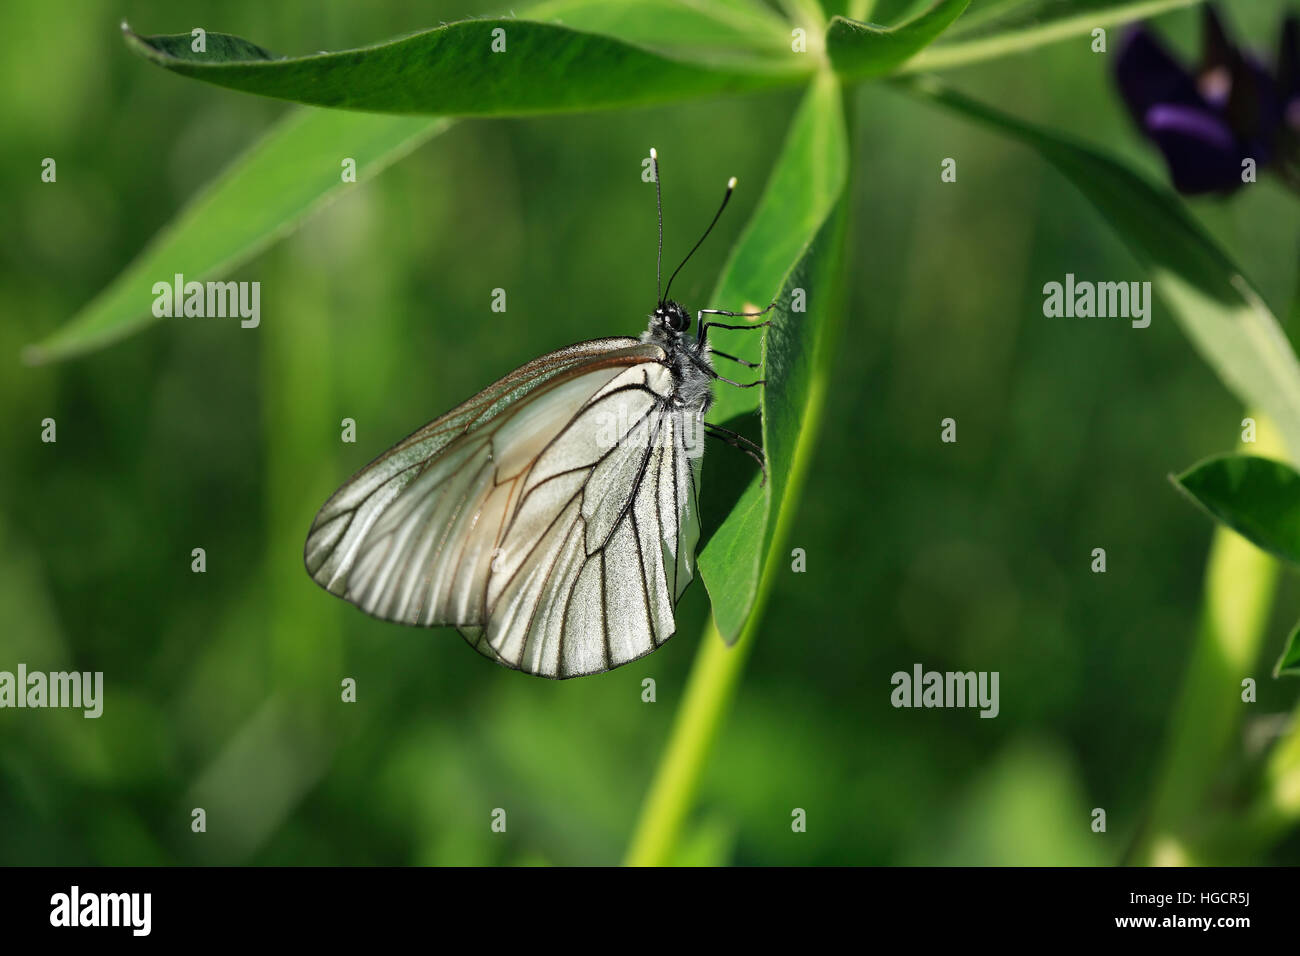 Cabbage white butterfly closeup on green plants background Stock Photo